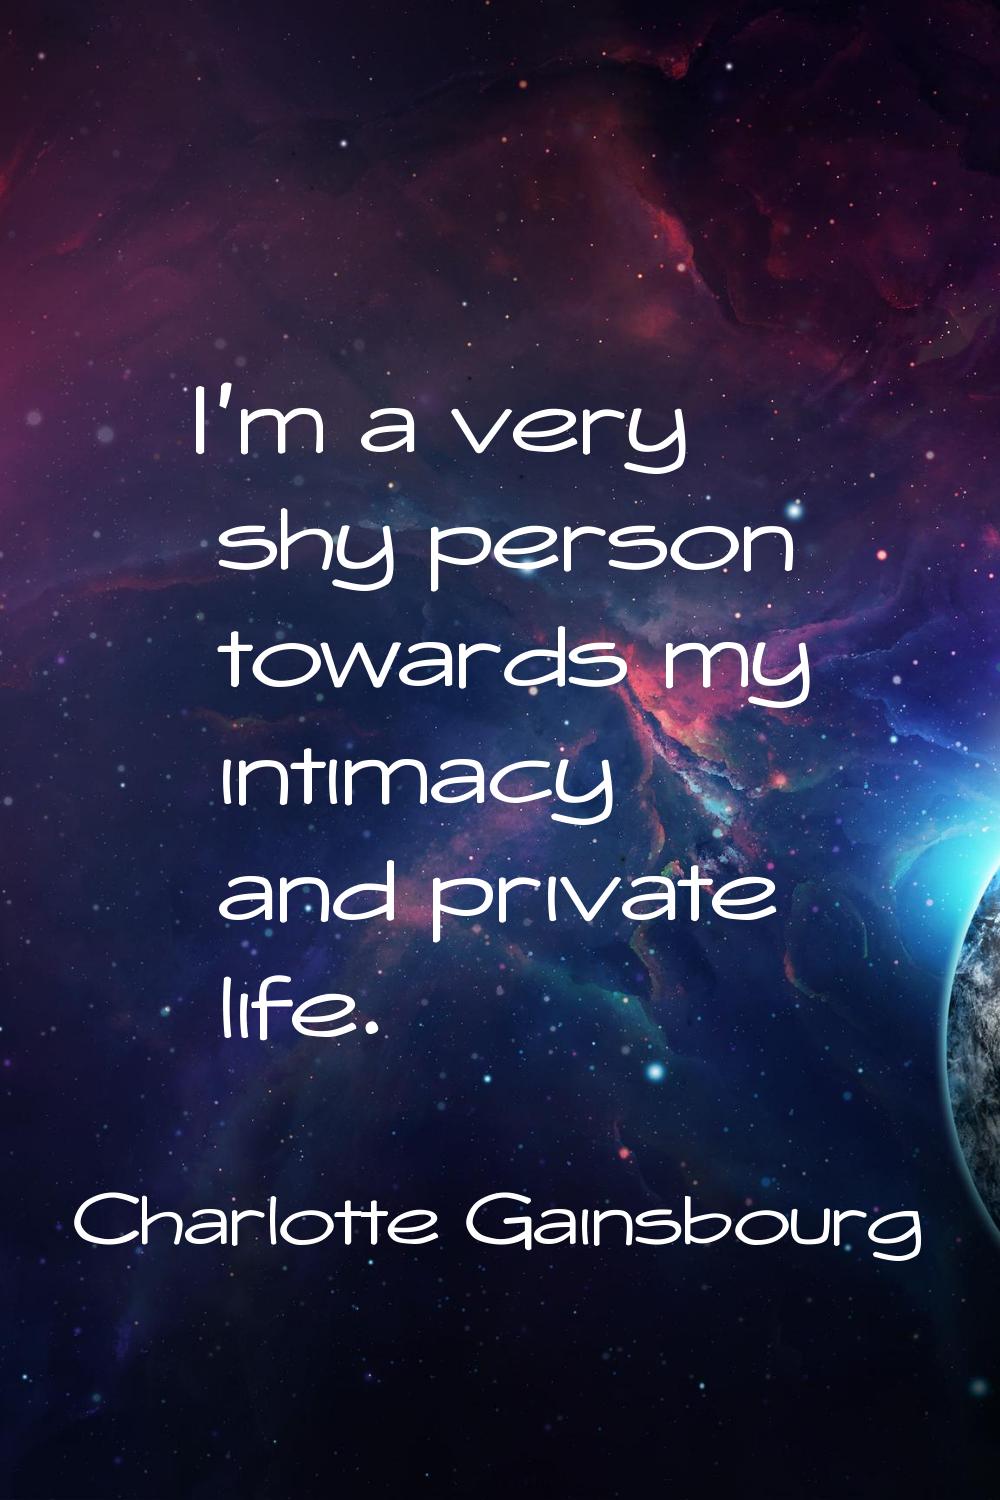 I'm a very shy person towards my intimacy and private life.